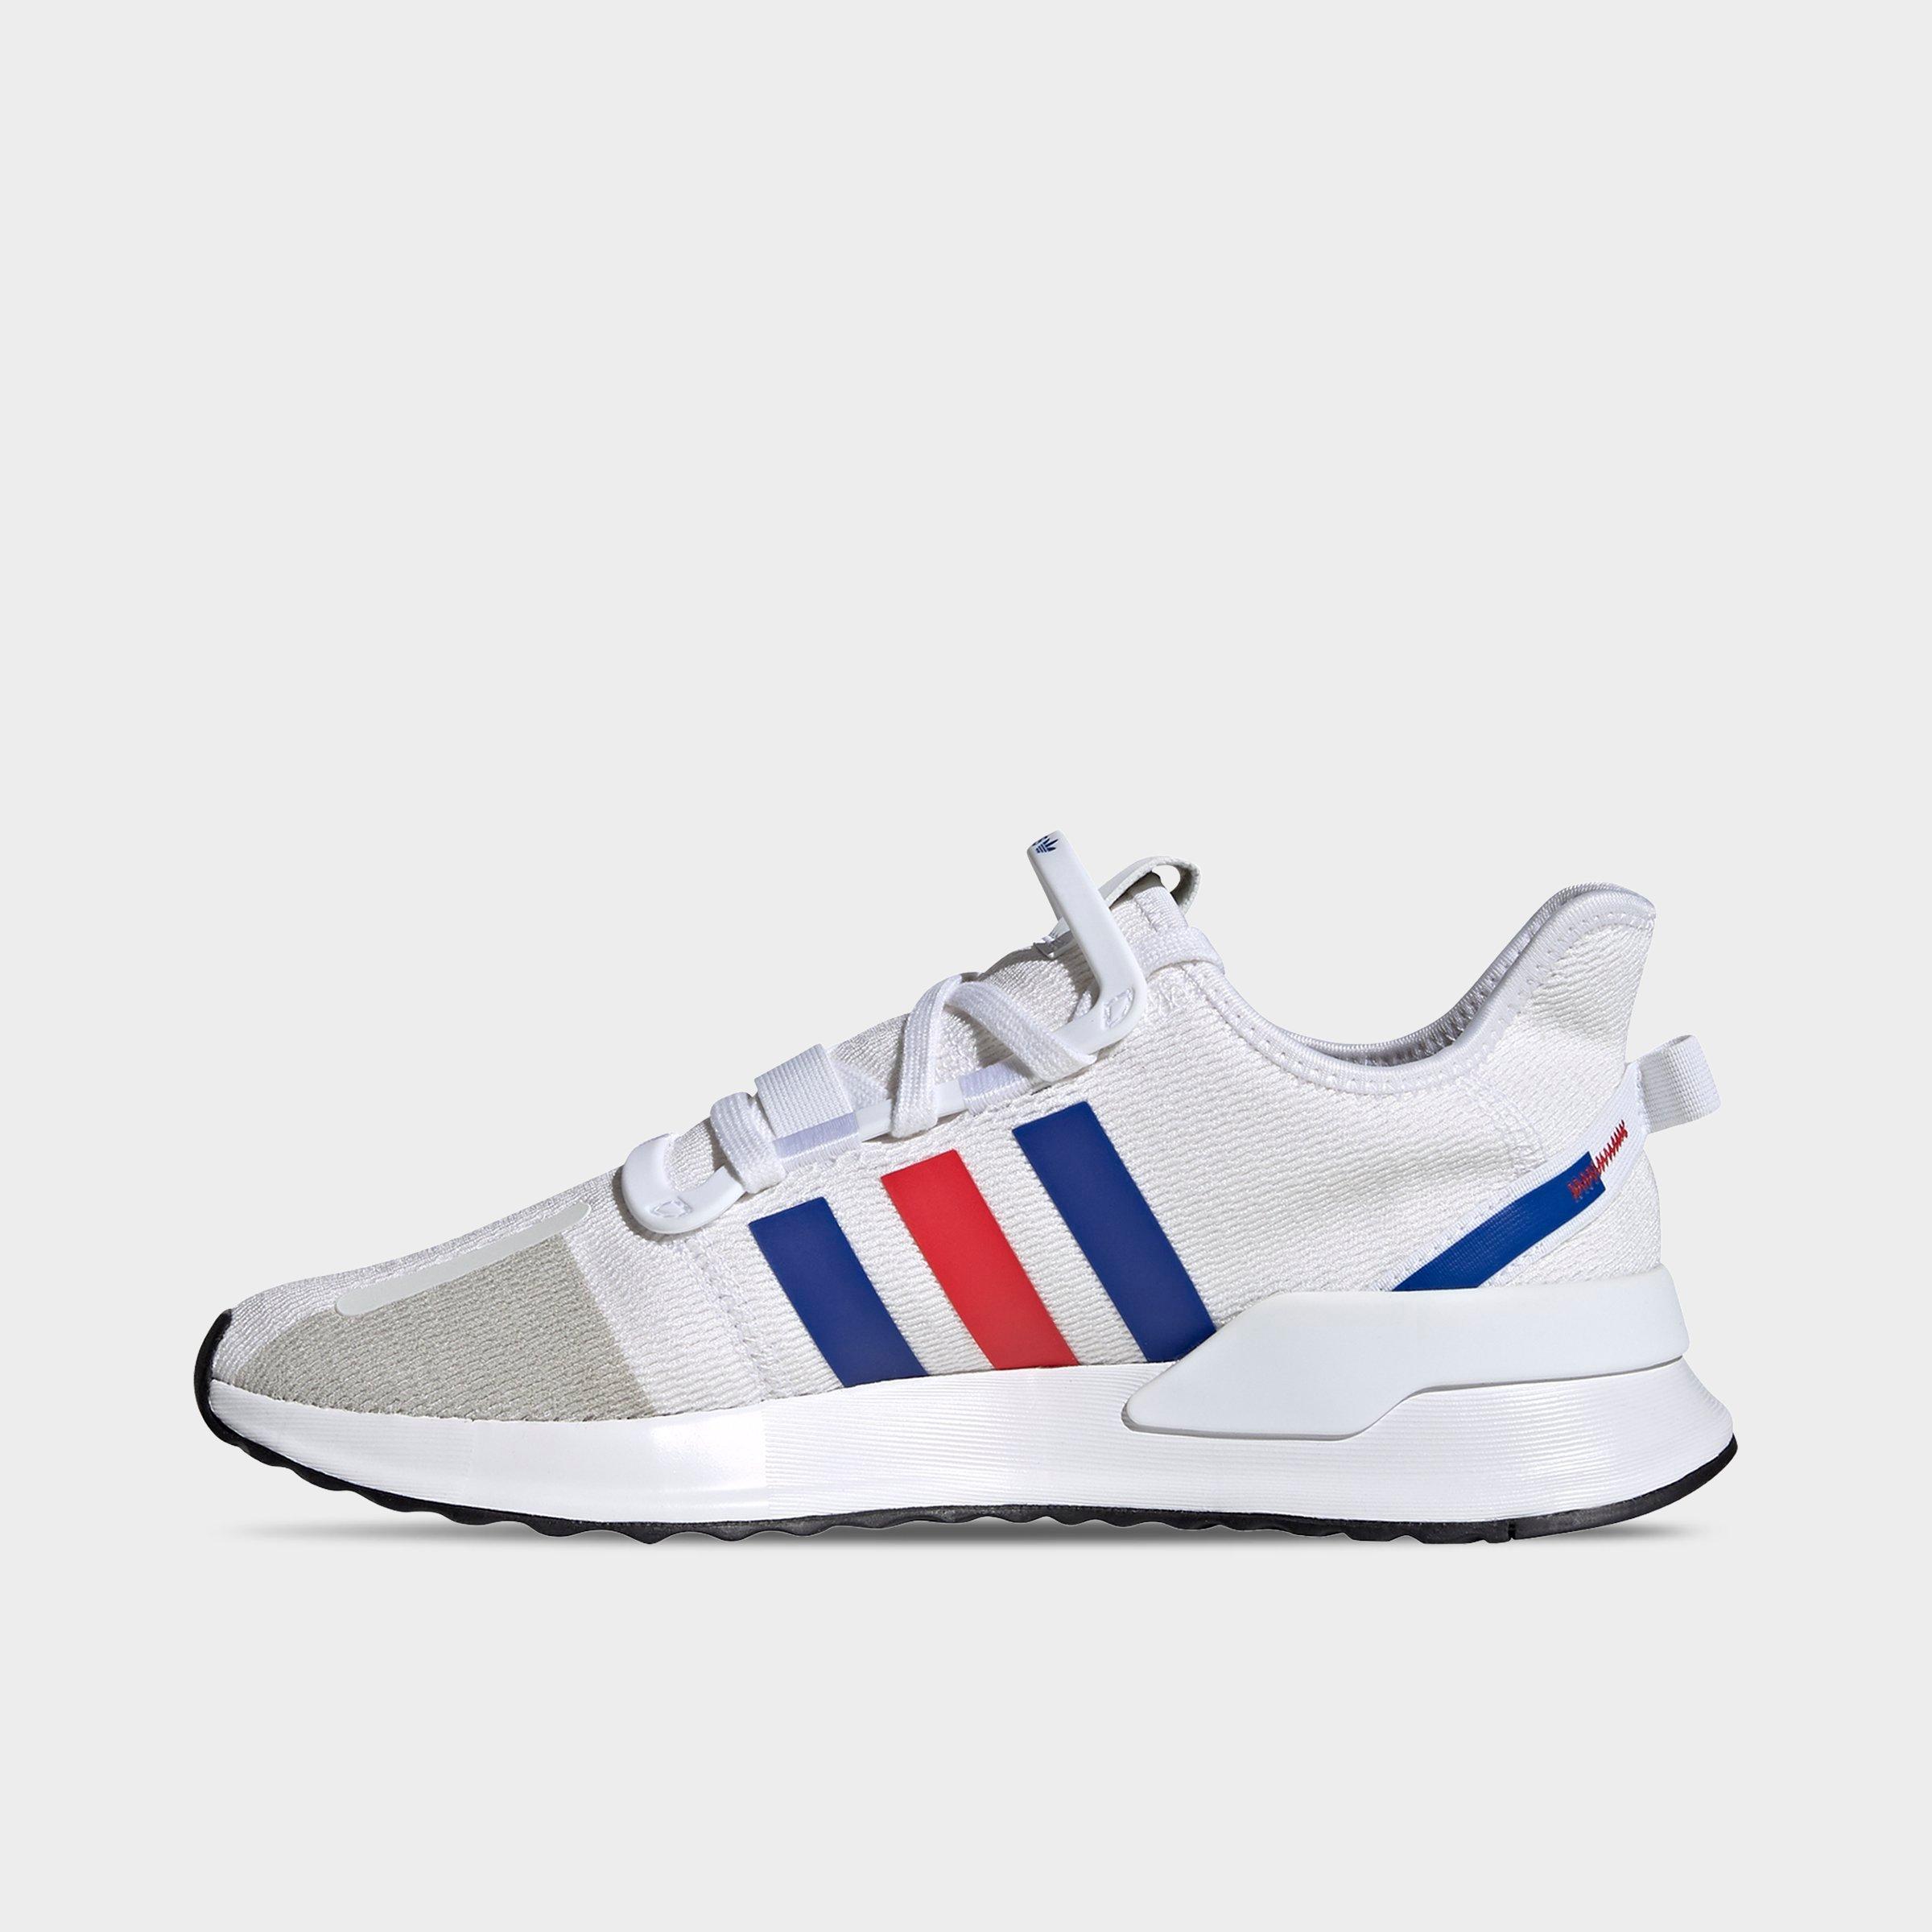 adidas runner casual shoes